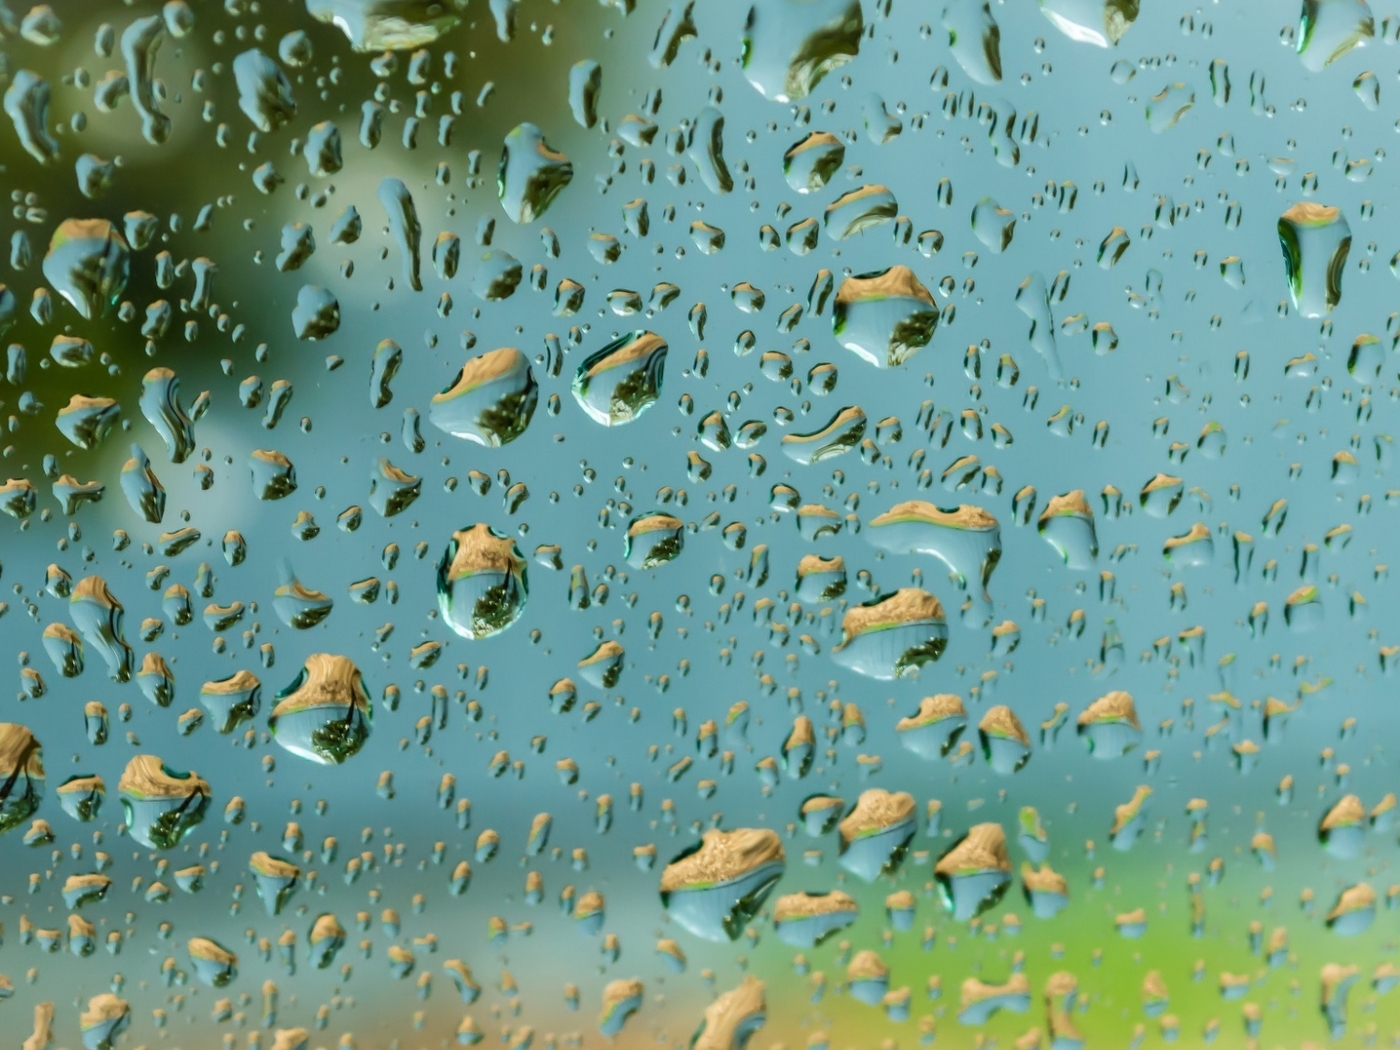 Image: Drops, water, glass, blurred background